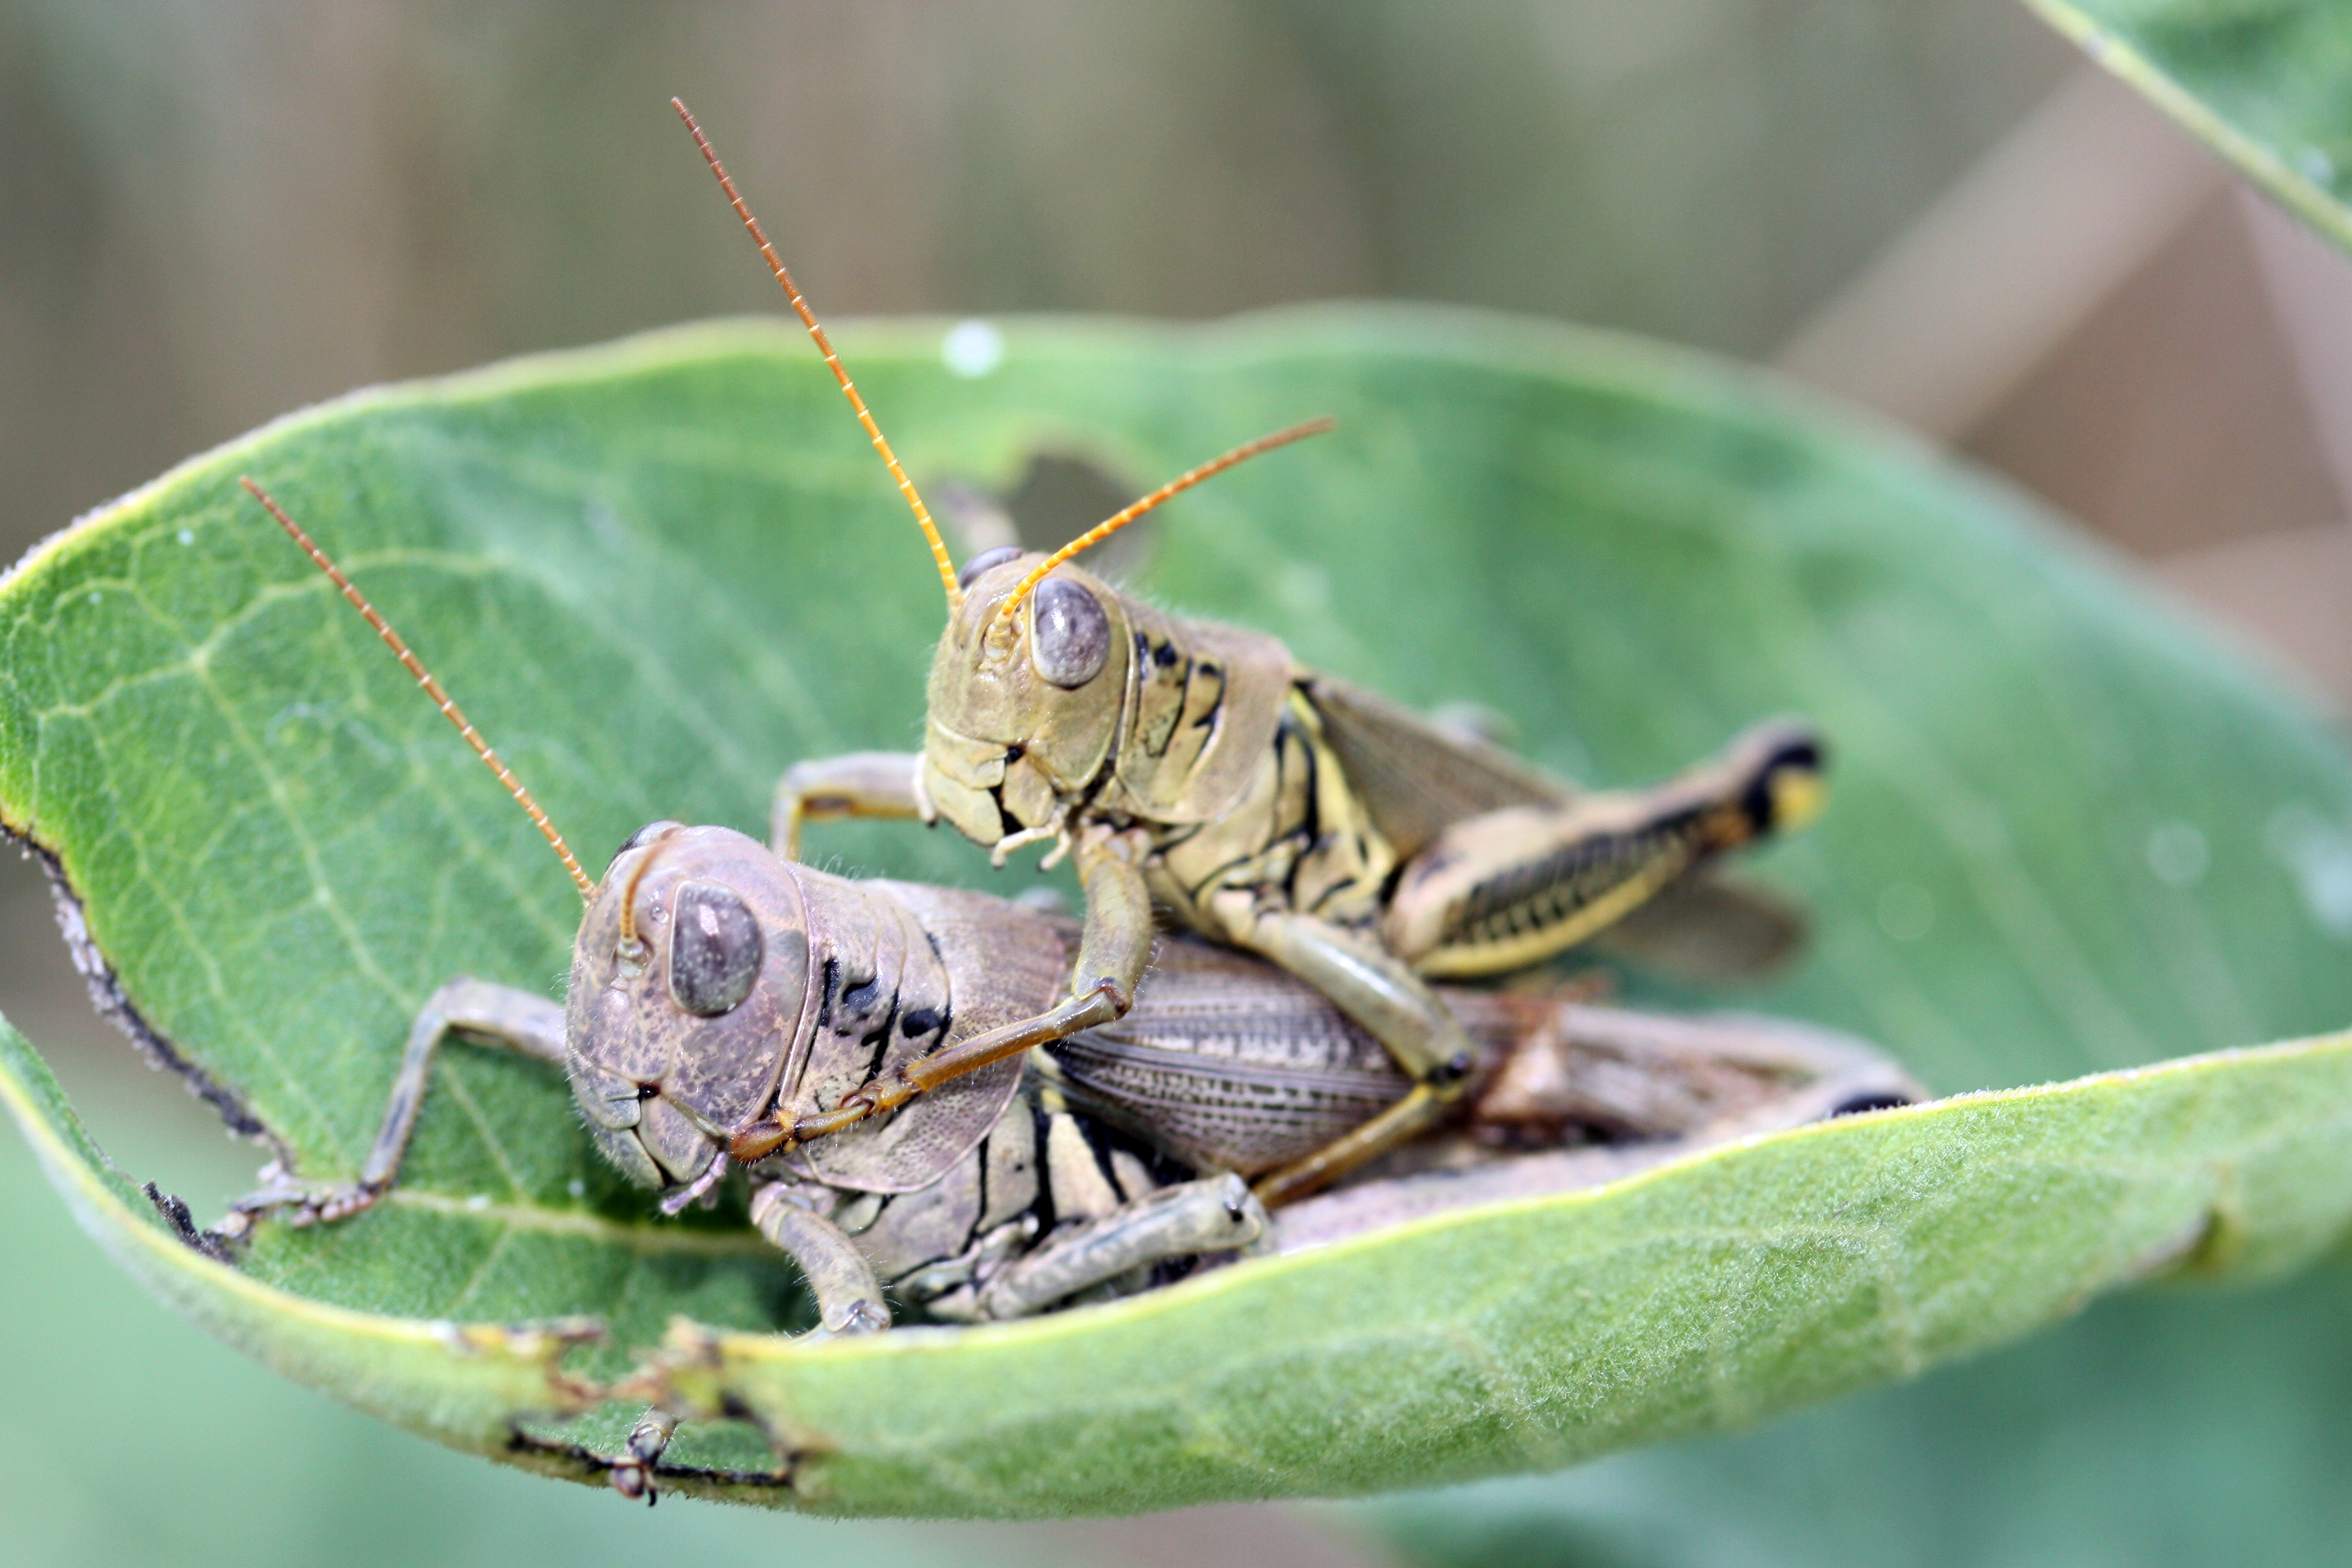 Mating grasshoppers photo